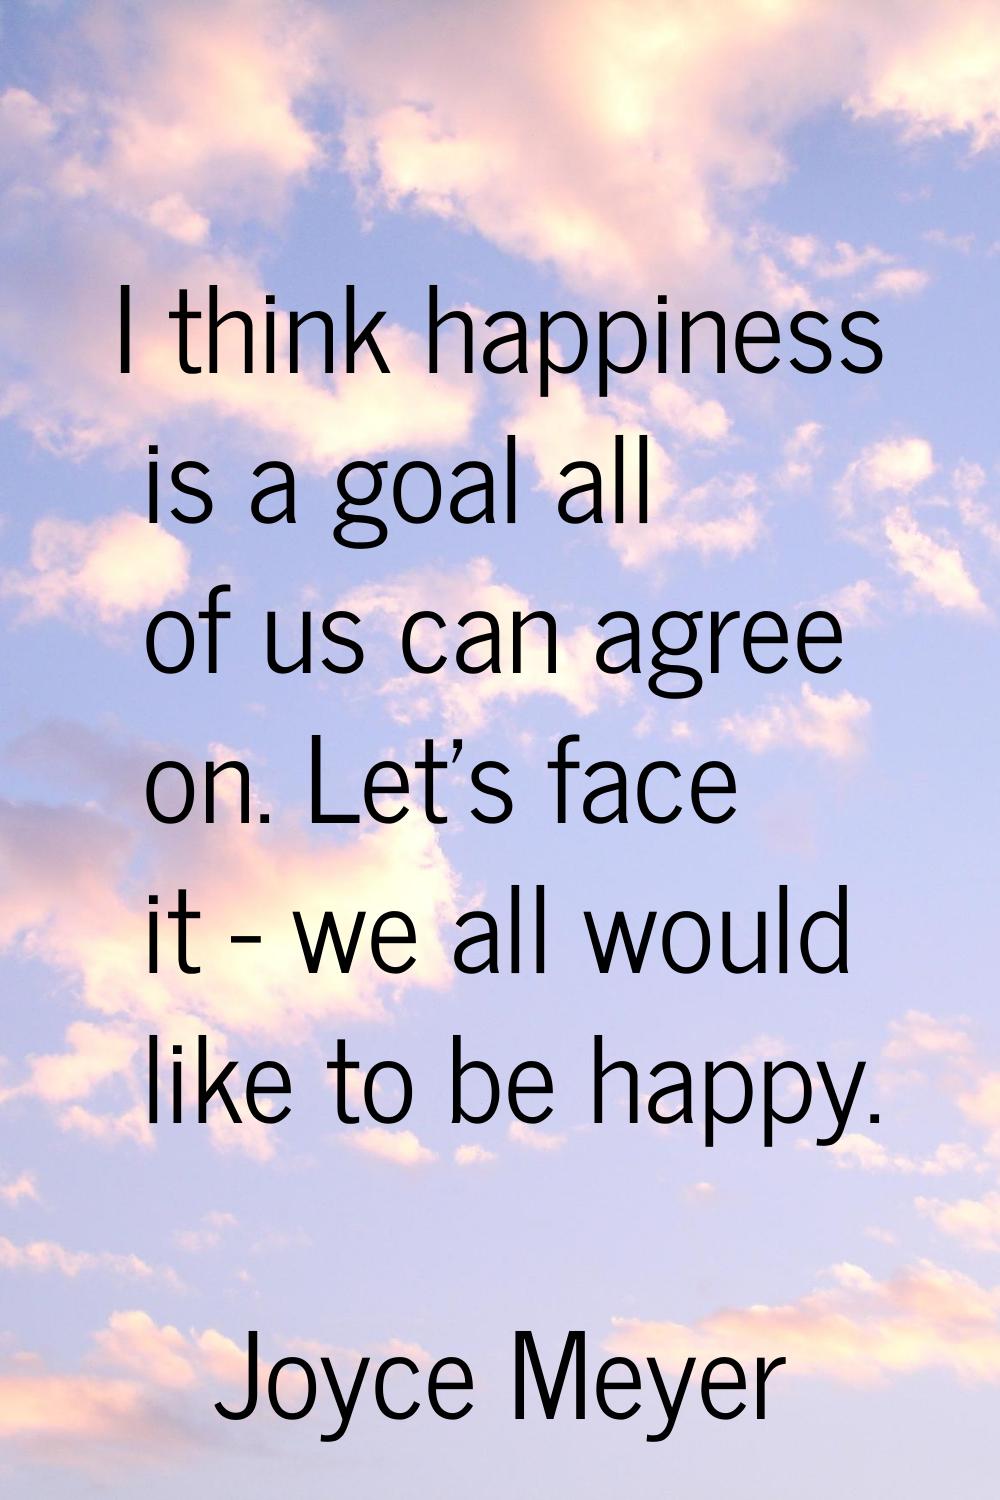 I think happiness is a goal all of us can agree on. Let's face it - we all would like to be happy.